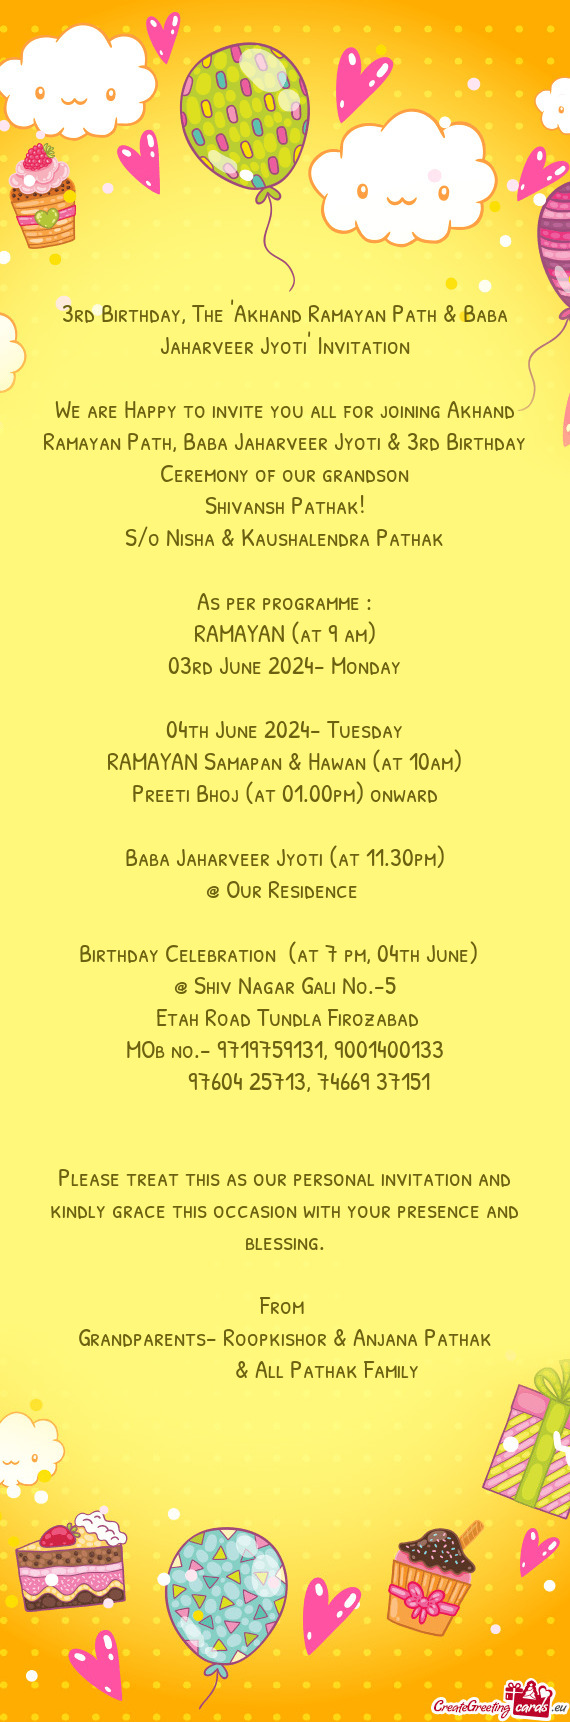 We are Happy to invite you all for joining Akhand Ramayan Path, Baba Jaharveer Jyoti & 3rd Birthday